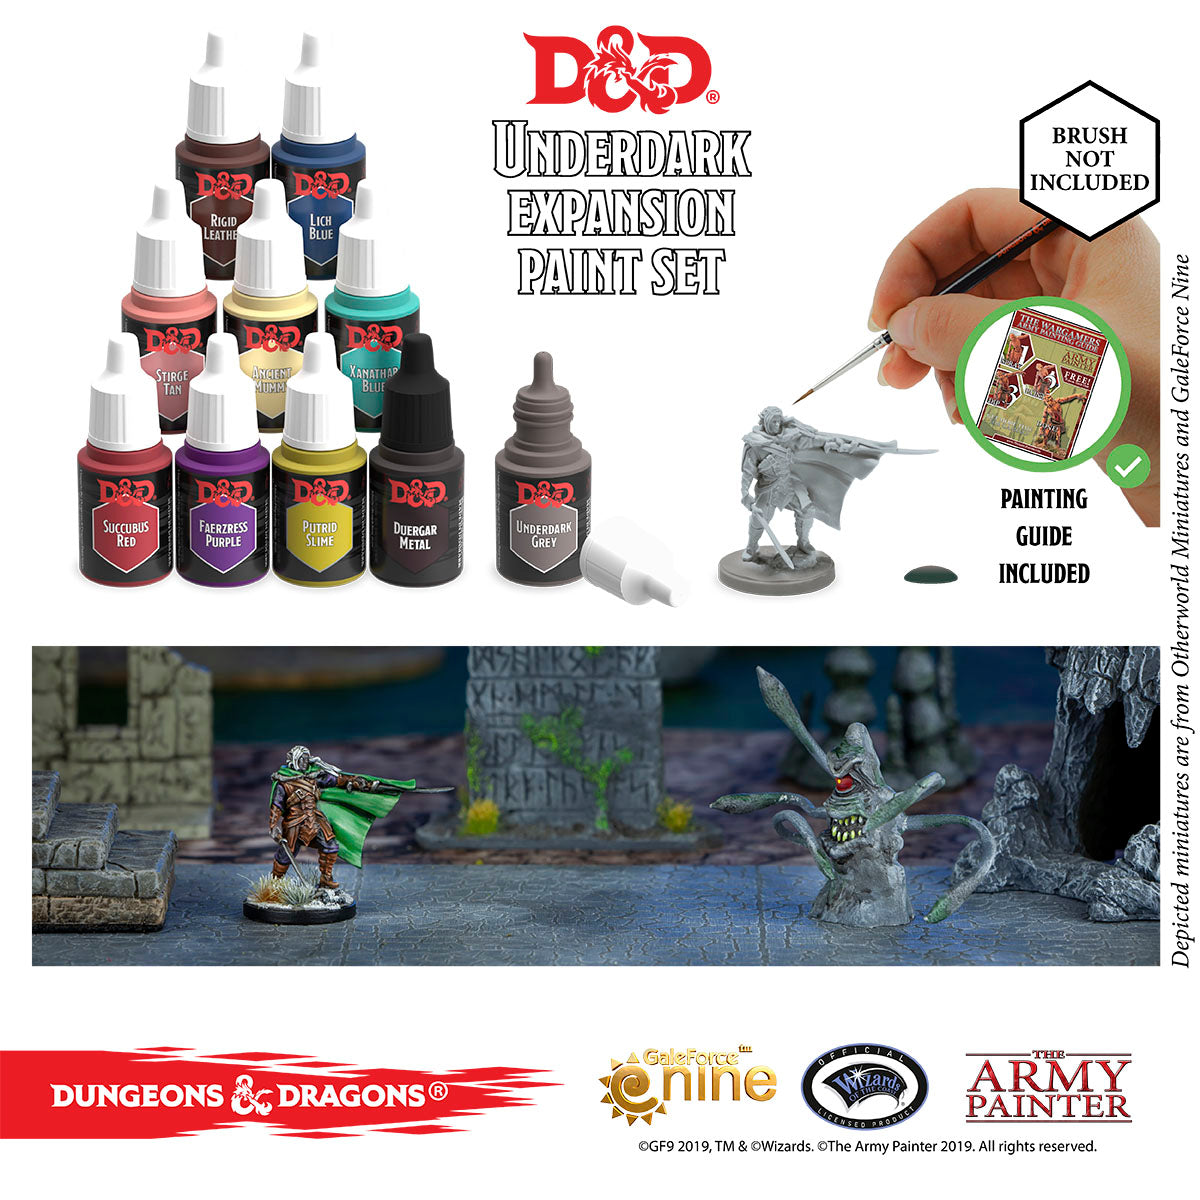 The Army Painter 75001 Dungeons and Dragons Adventurer's Acrylic